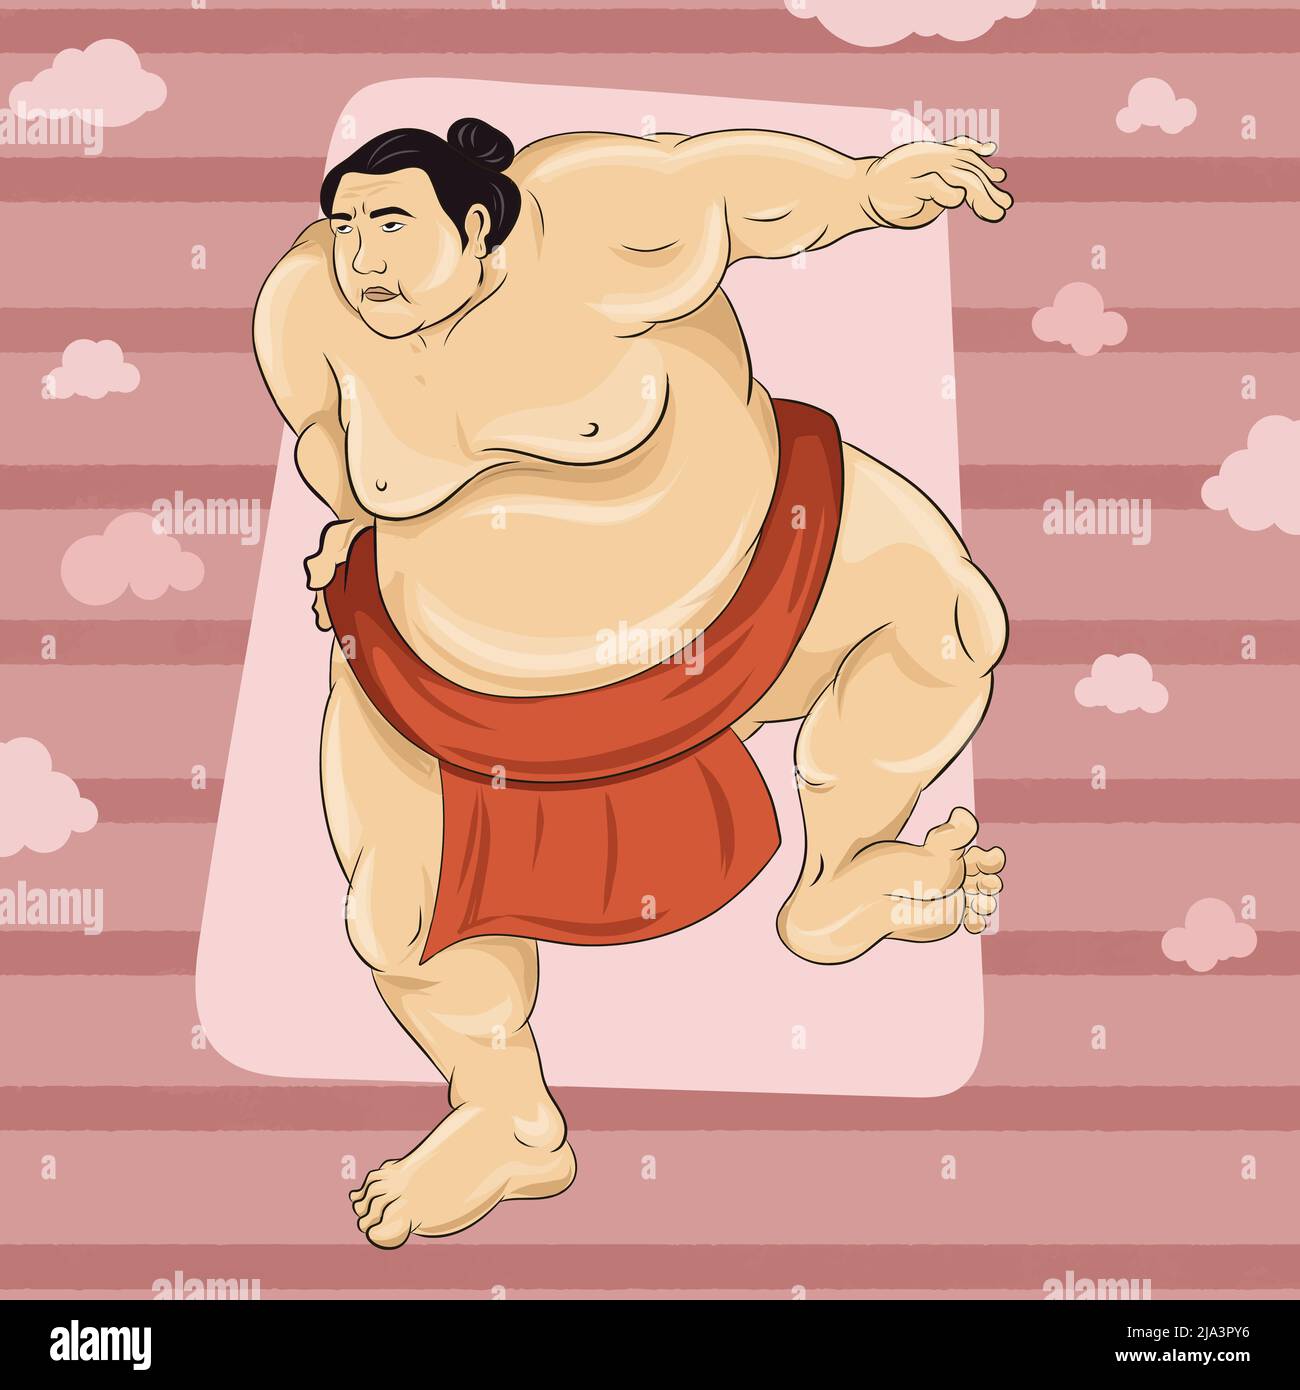 Sumo Wrestler standing in an aggressive stance with one leg up. Big Tall Huge Angry Man. Japanese Sport. Stock Vector